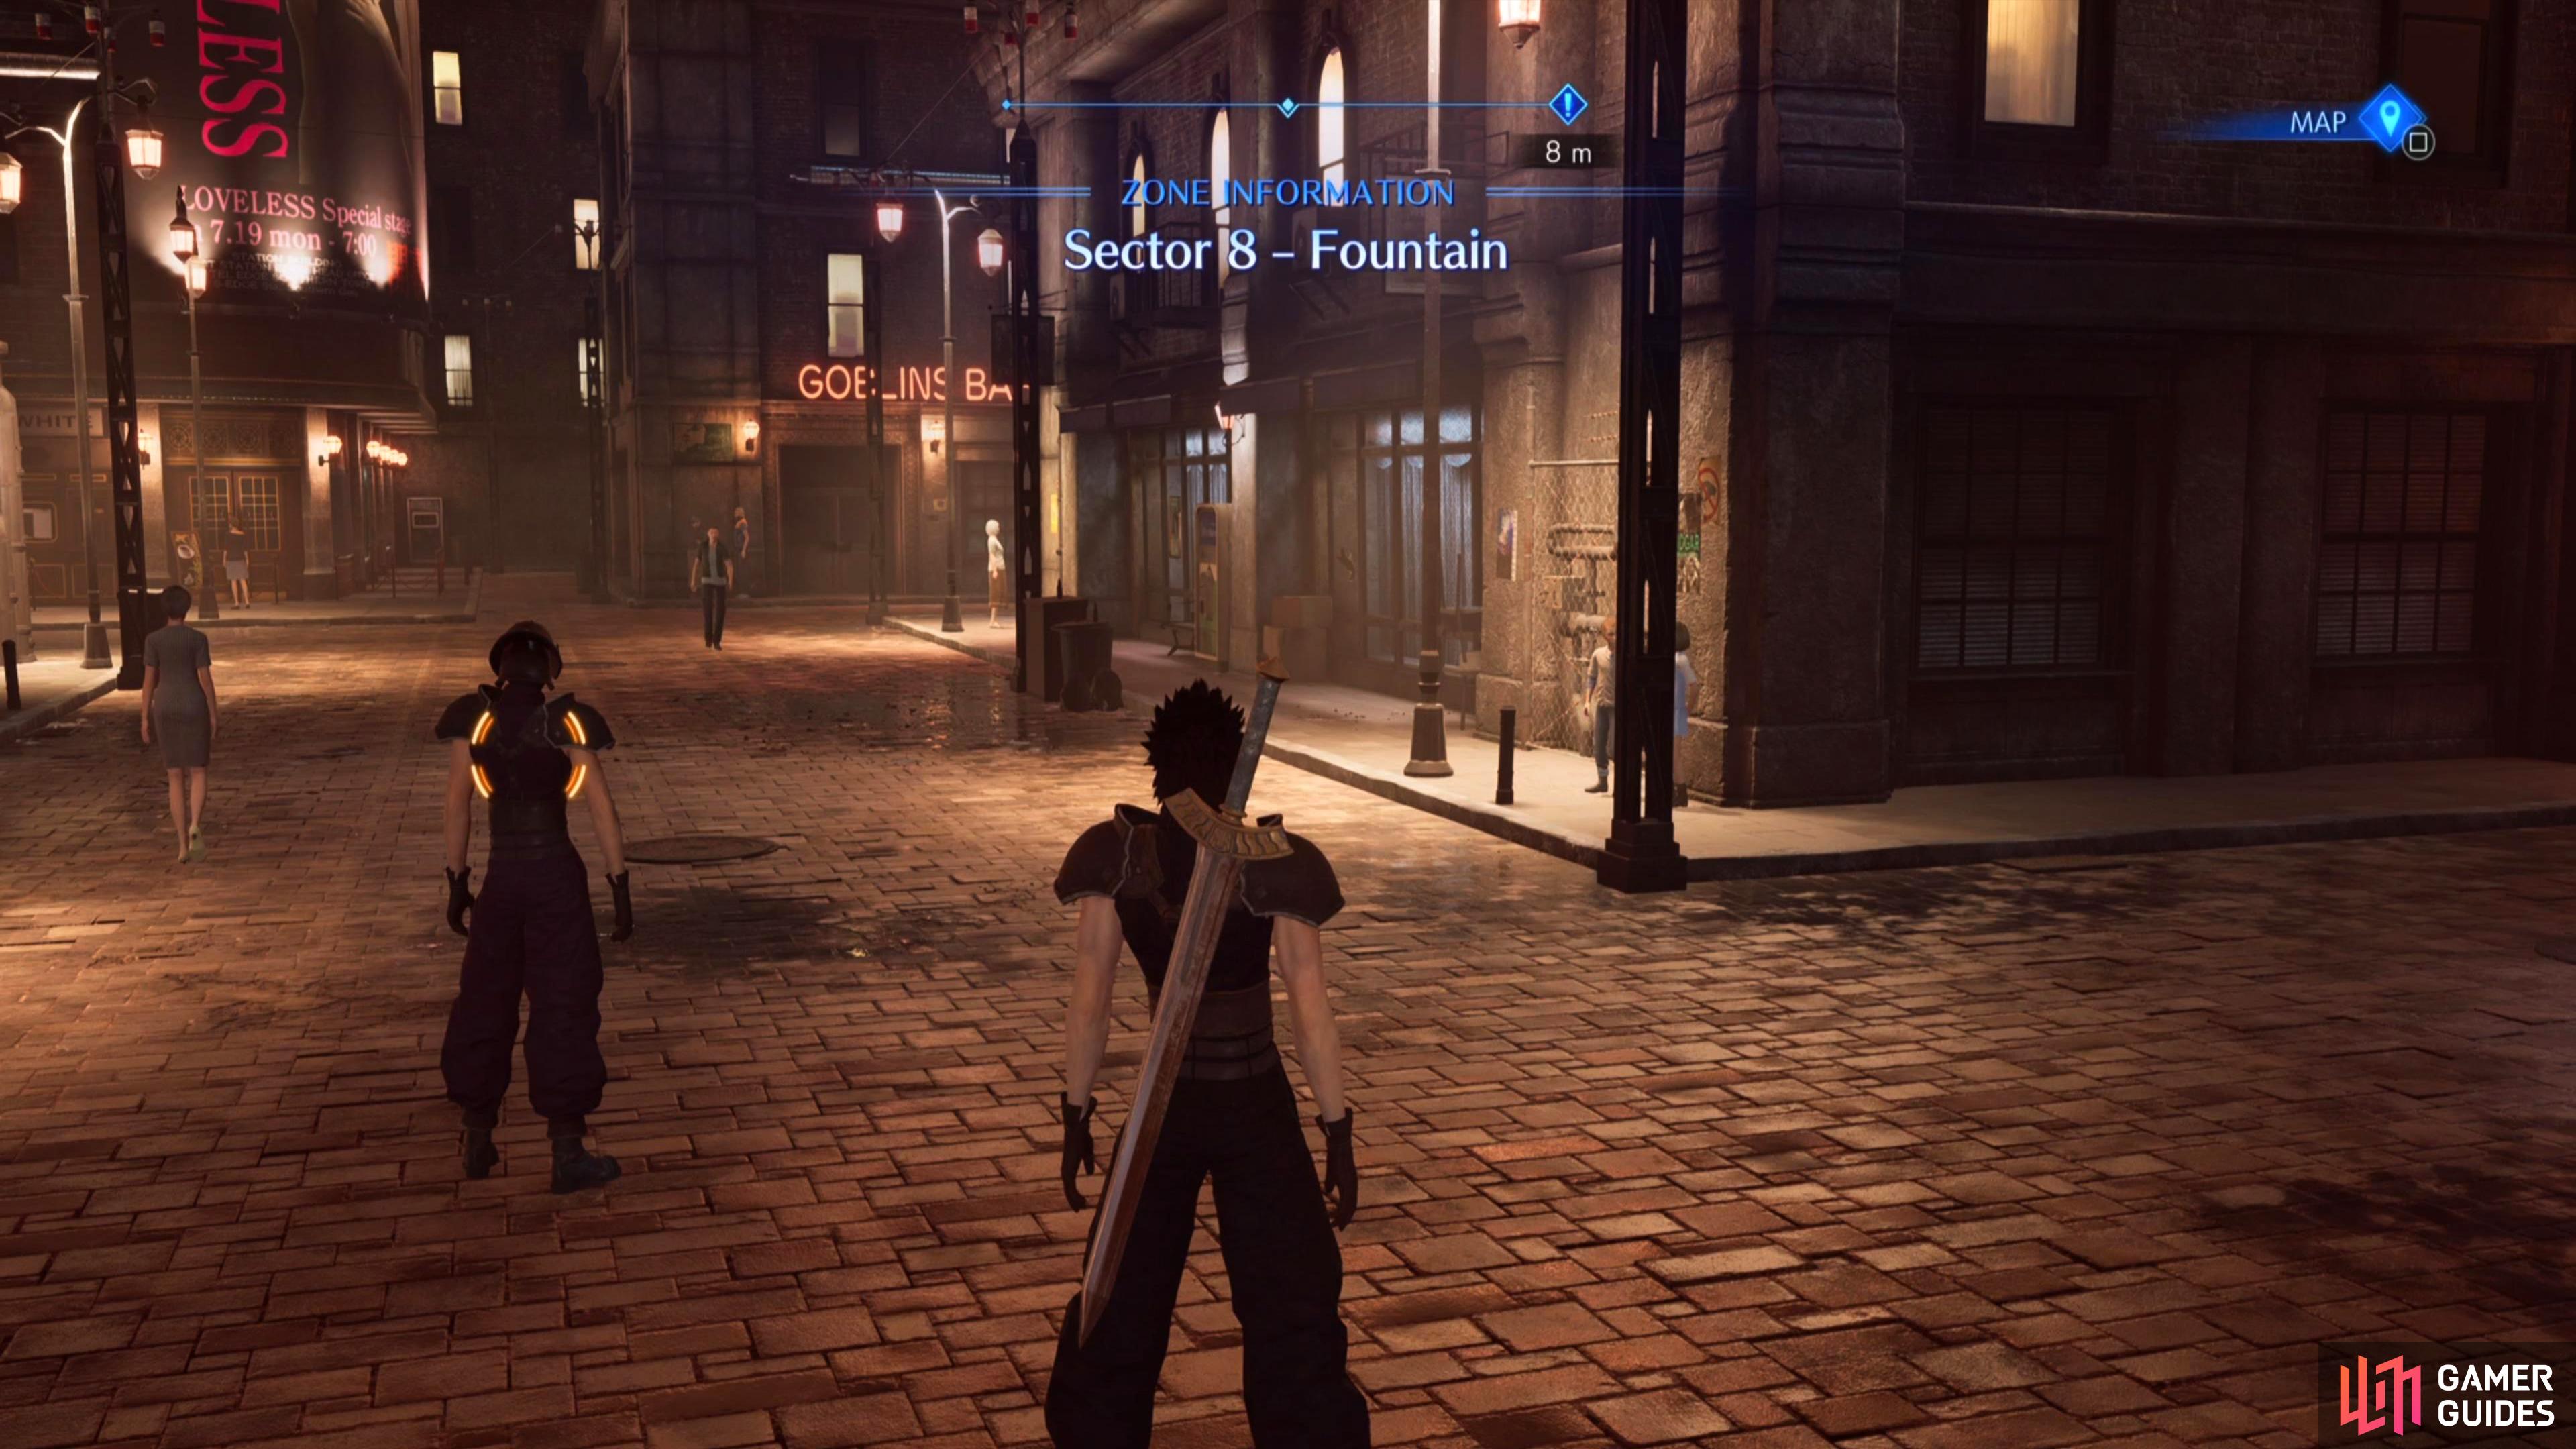 Talk to the SOLDIER near the entrance of LOVELESS Avenue to start the Wutai Nemesis quest.